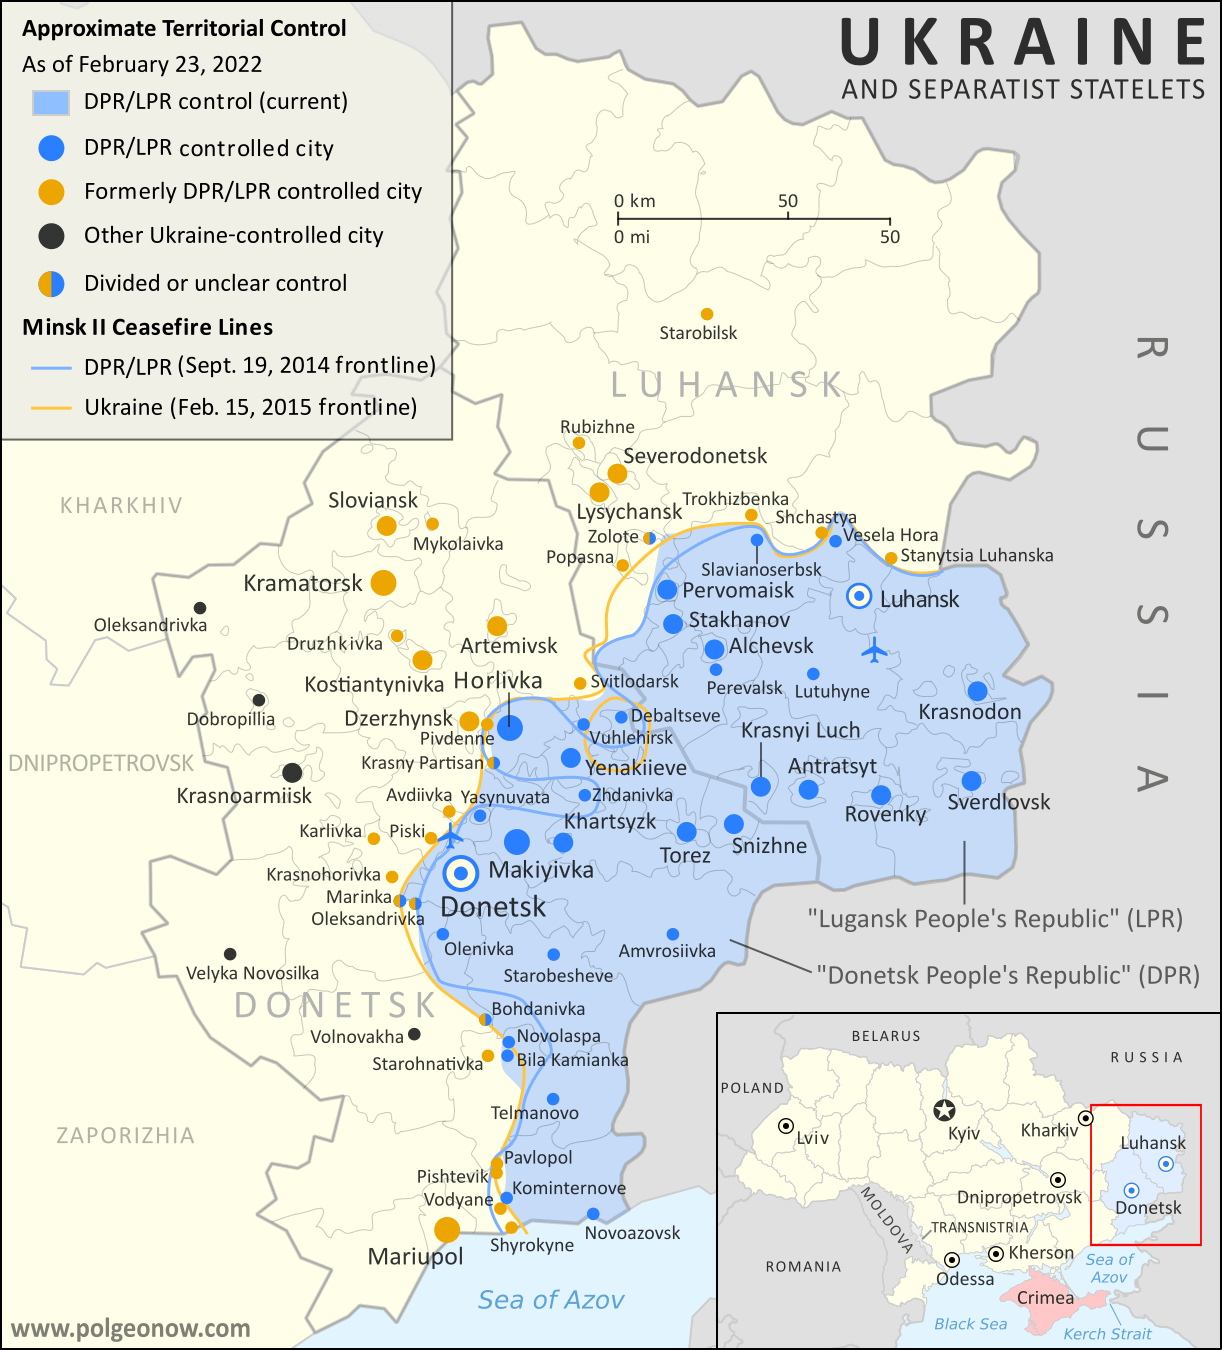 Map of territorial control and frontlines in the Donbass region of Donetsk and Luhansk, internationally recognized as part of eastern Ukraine but partly controlled by the breakaway Donetsk People's Republic and Lugansk People's Republic. Updated for September 2020, with Minsk ceasefire lines shown. Colorblind accessible.